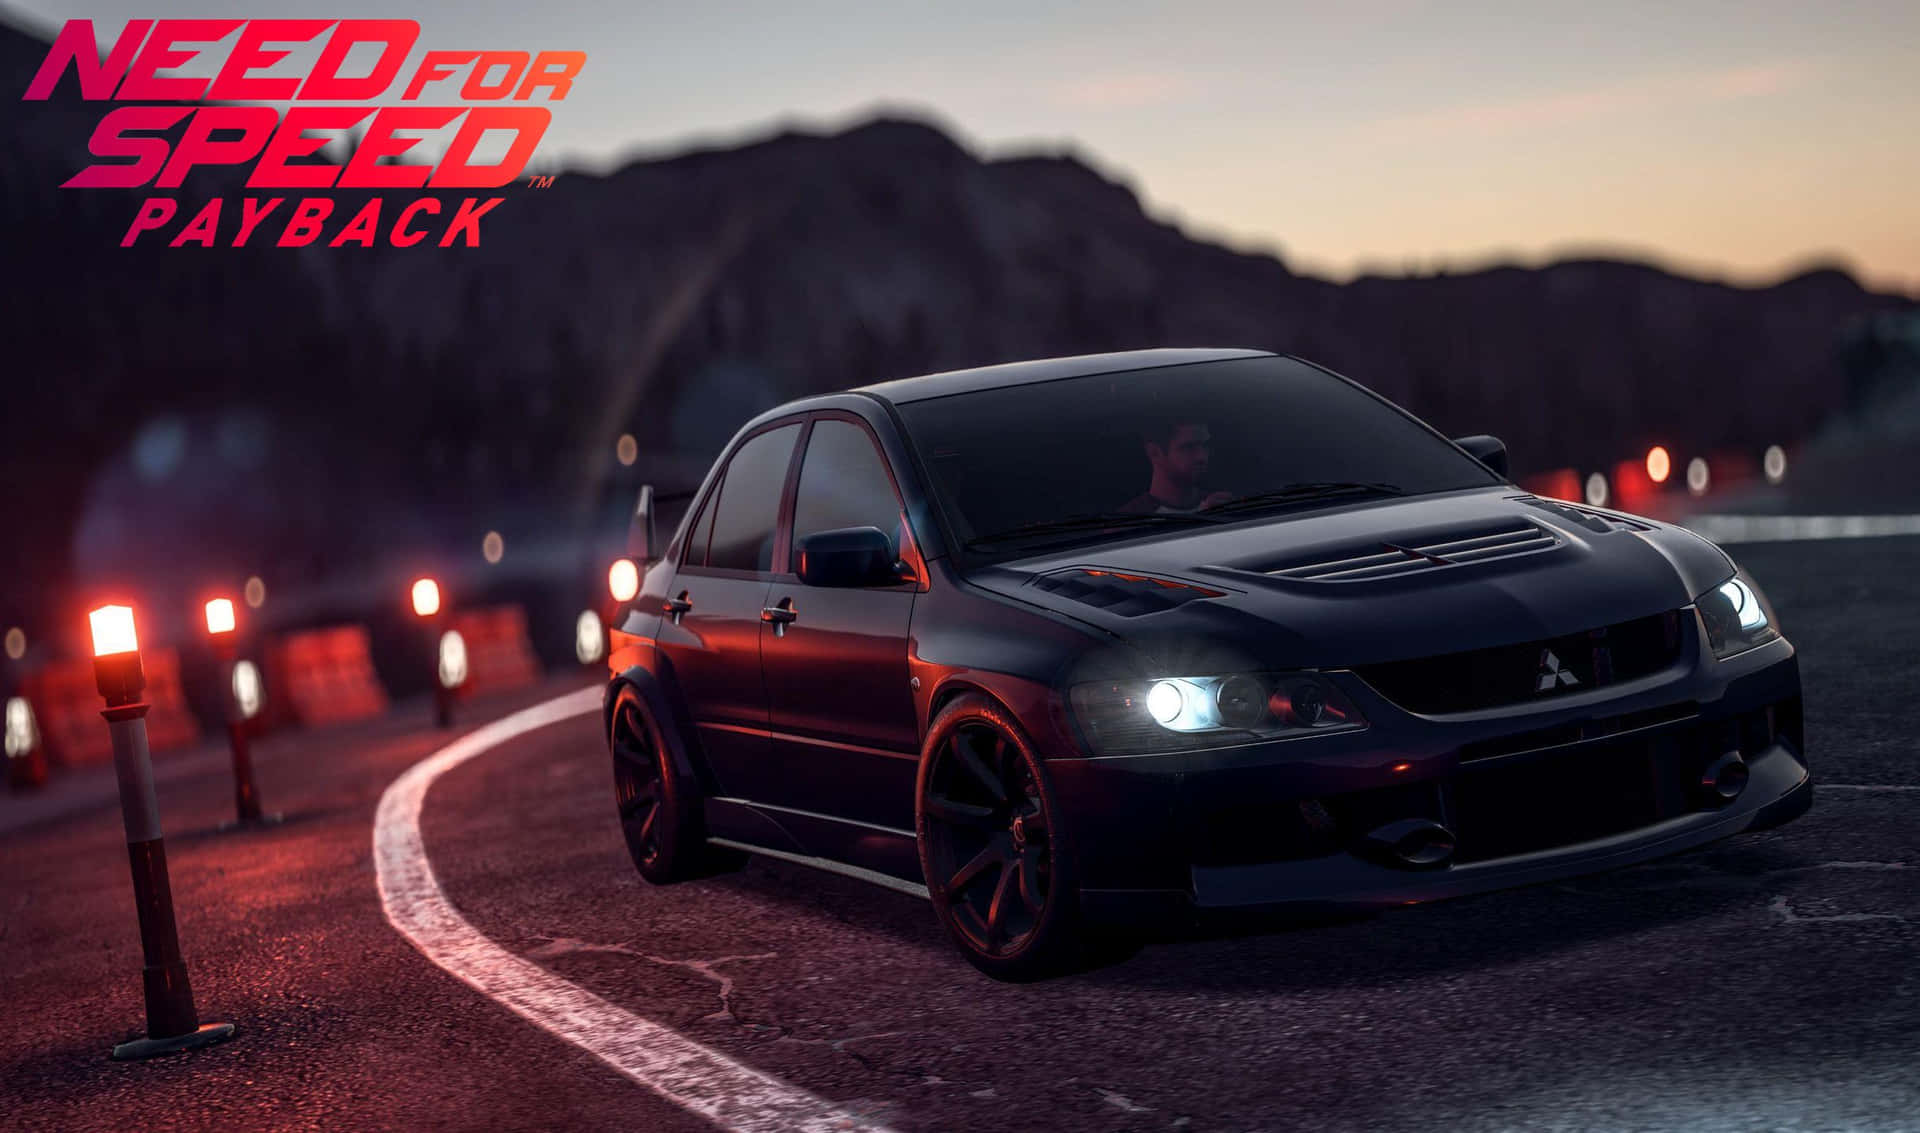 2440x1440 Need For Speed Payback Background